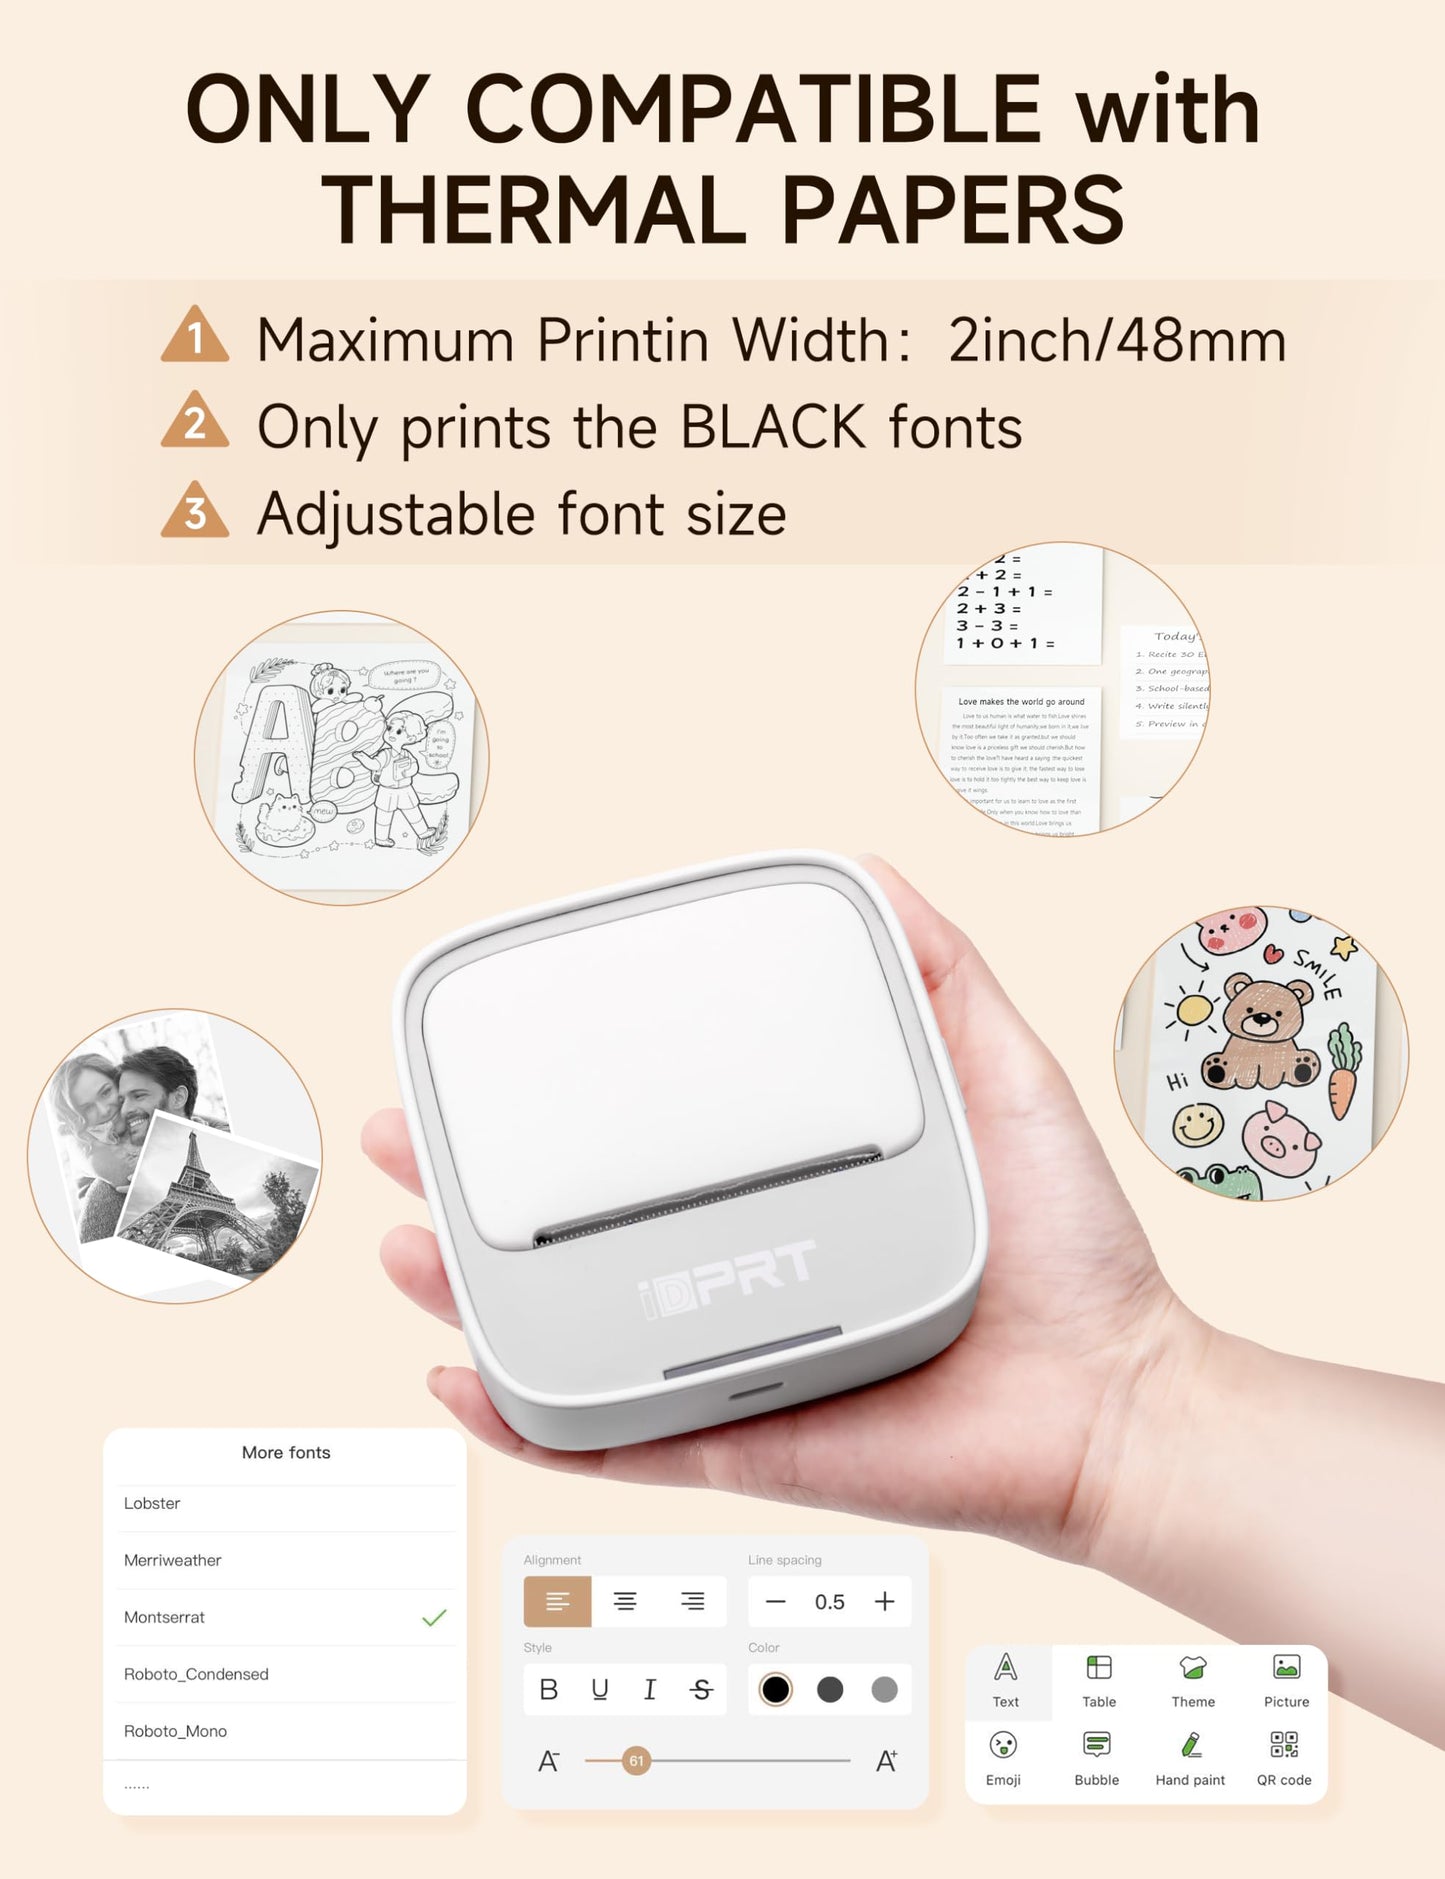 iDPRT Mini Printer with 1 Roll Sticker Paper, Portable Sticker Printer Efficiently and Quickly, Thermal Printer for Study Notes, Pictures, DIY, Label, Free App with Multiple Templates Printer